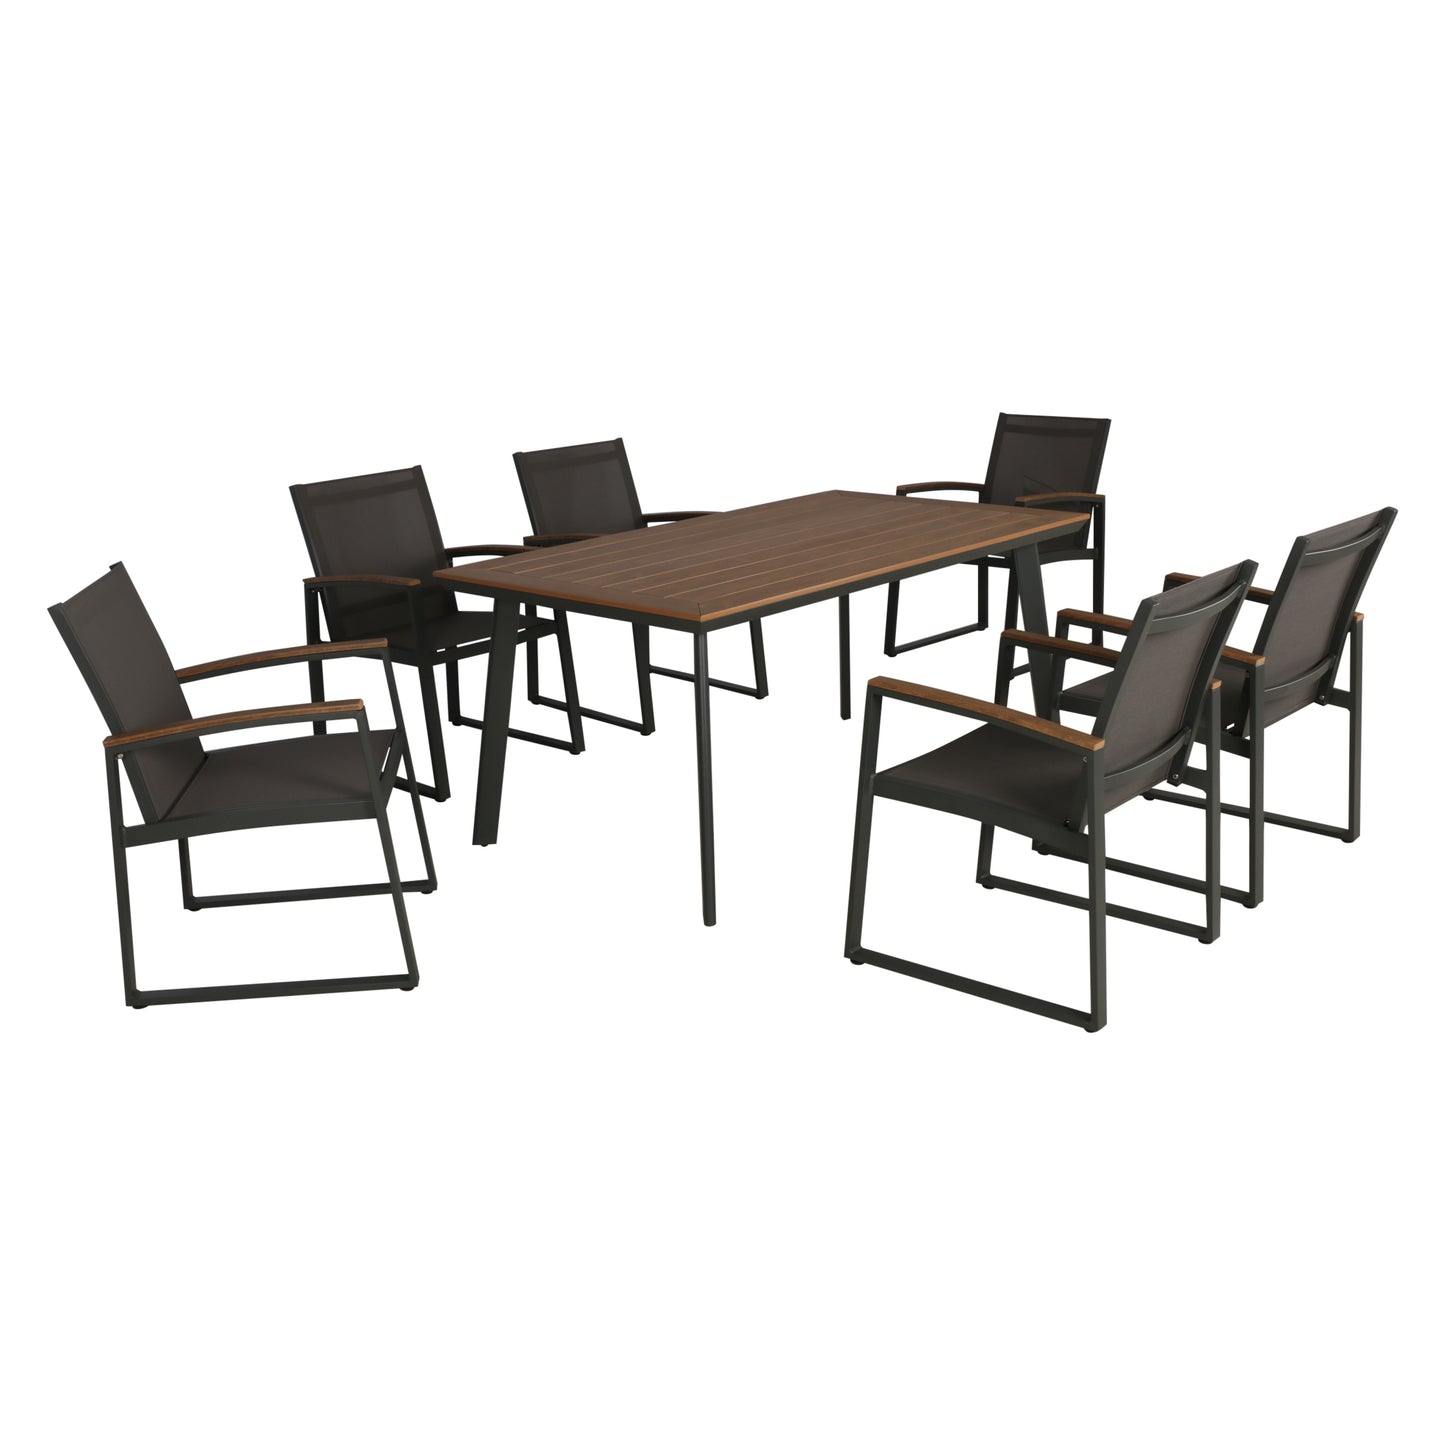 Lena Outdoor 7 Piece Aluminum Dining Set with Mesh Chairs